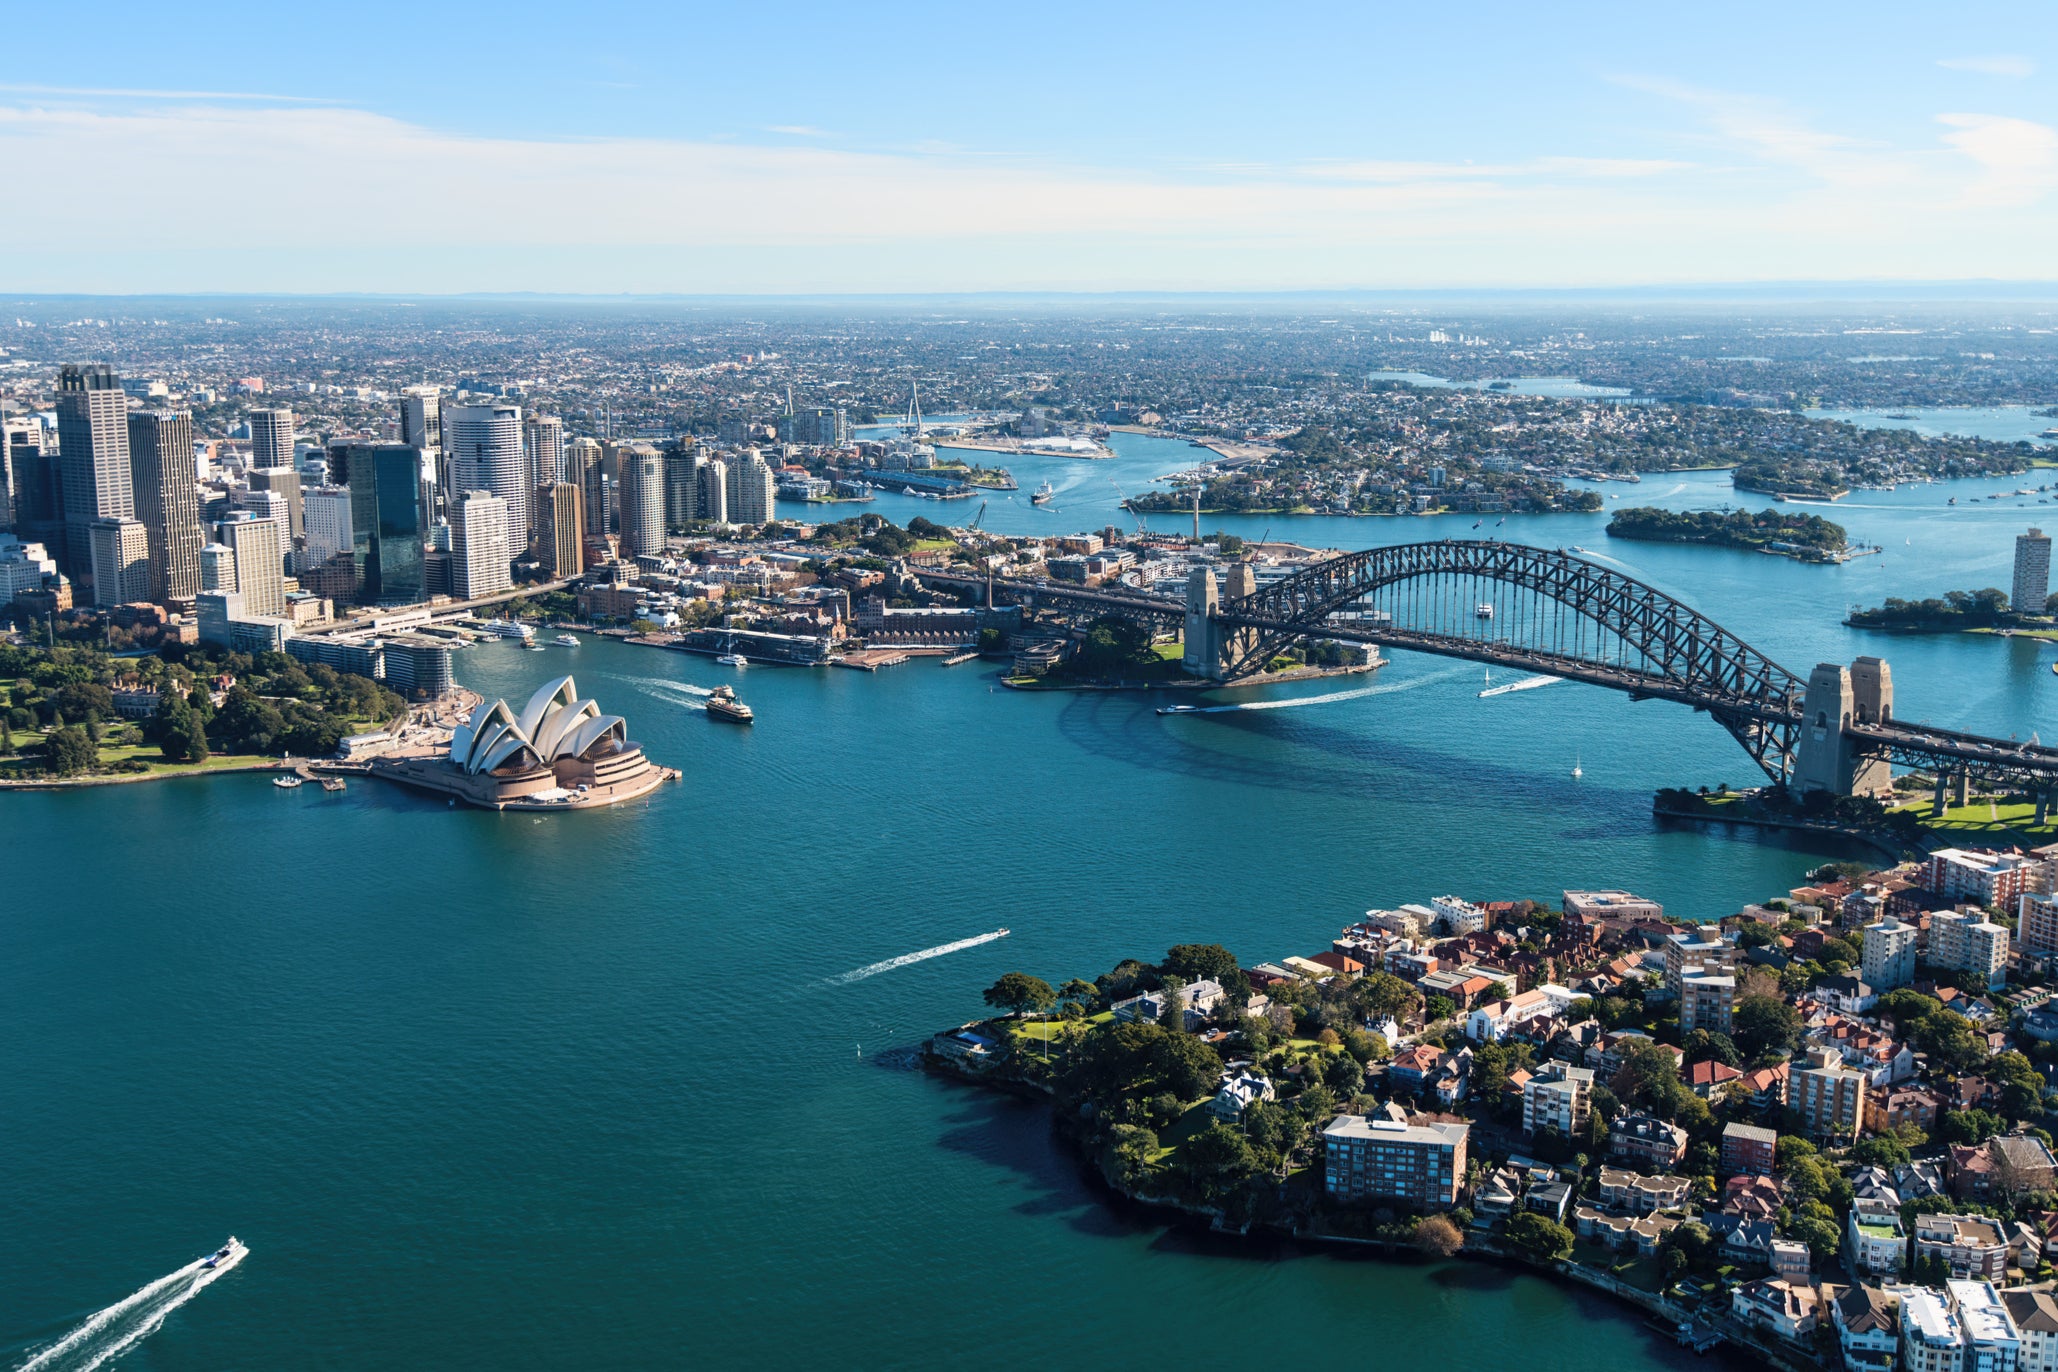 Sydney is home to some of Australia’s most famous landmarks